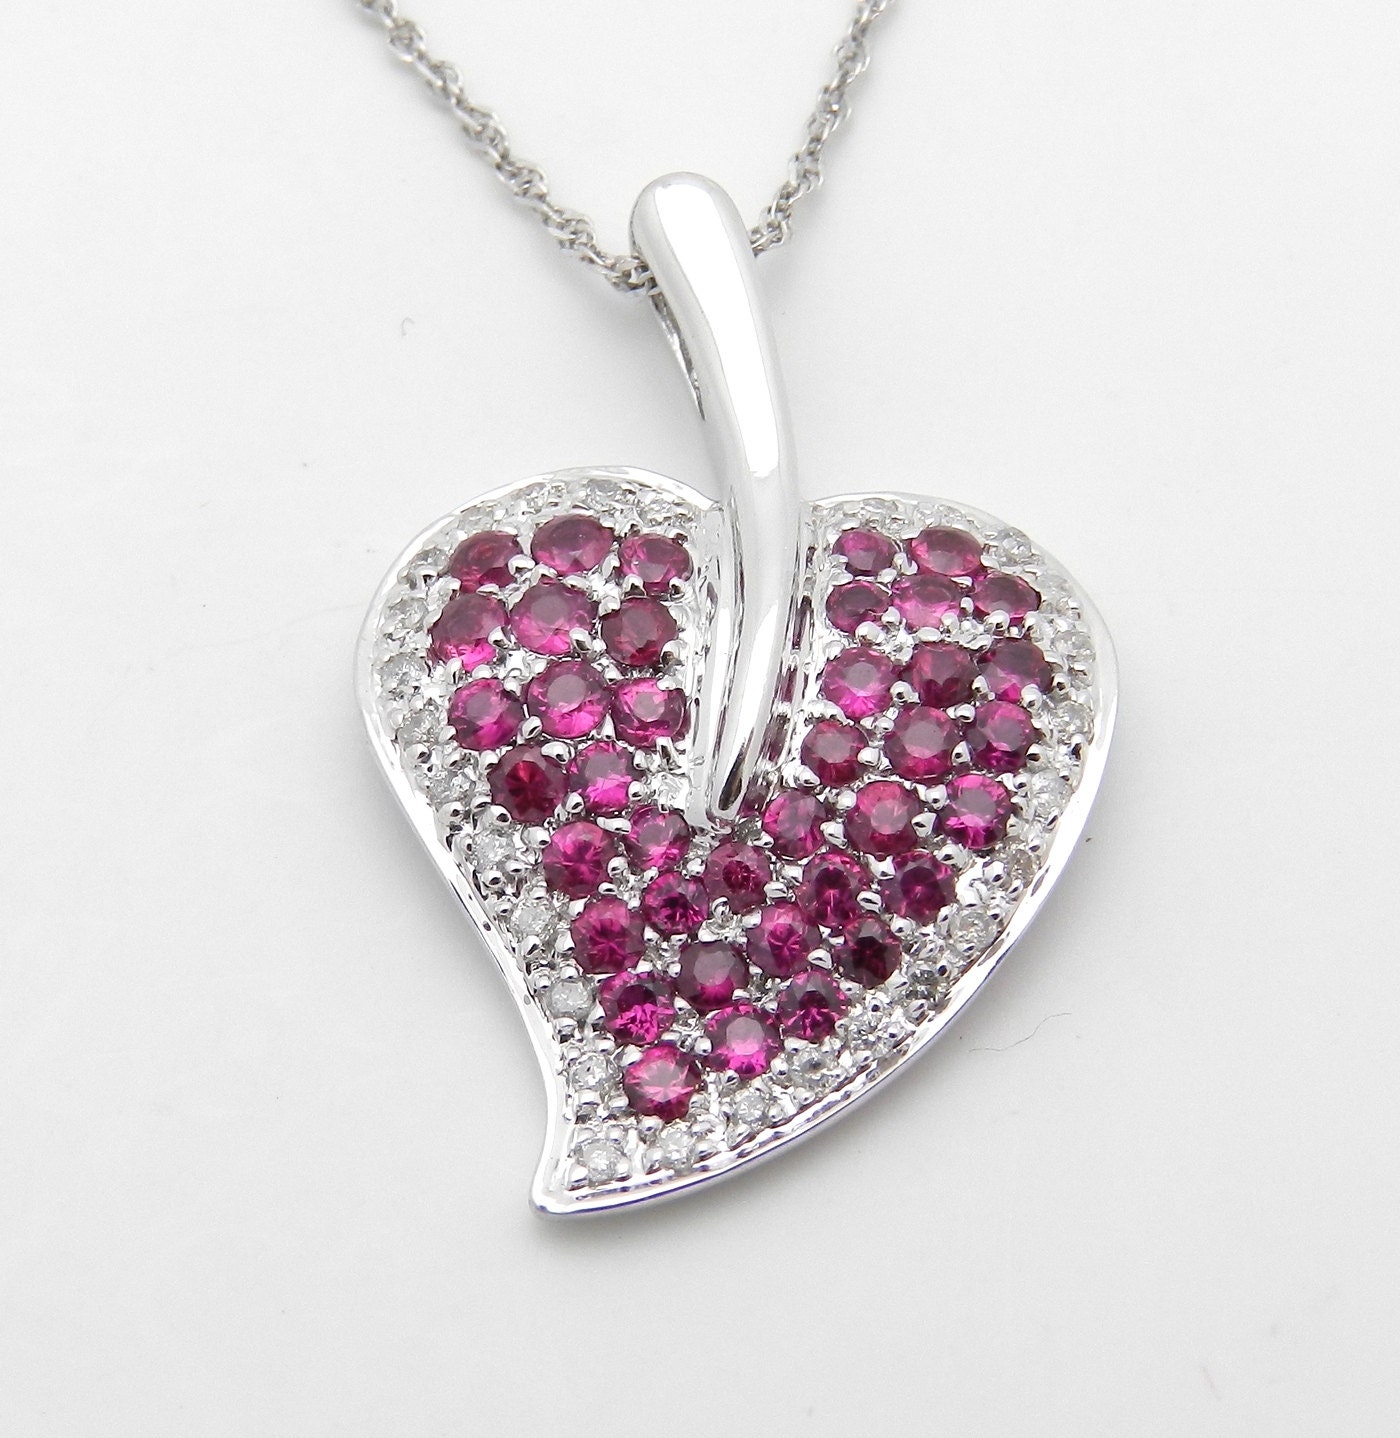 1.30 ct Diamond and Red Ruby Heart Pendant Necklace by GalaxyGems